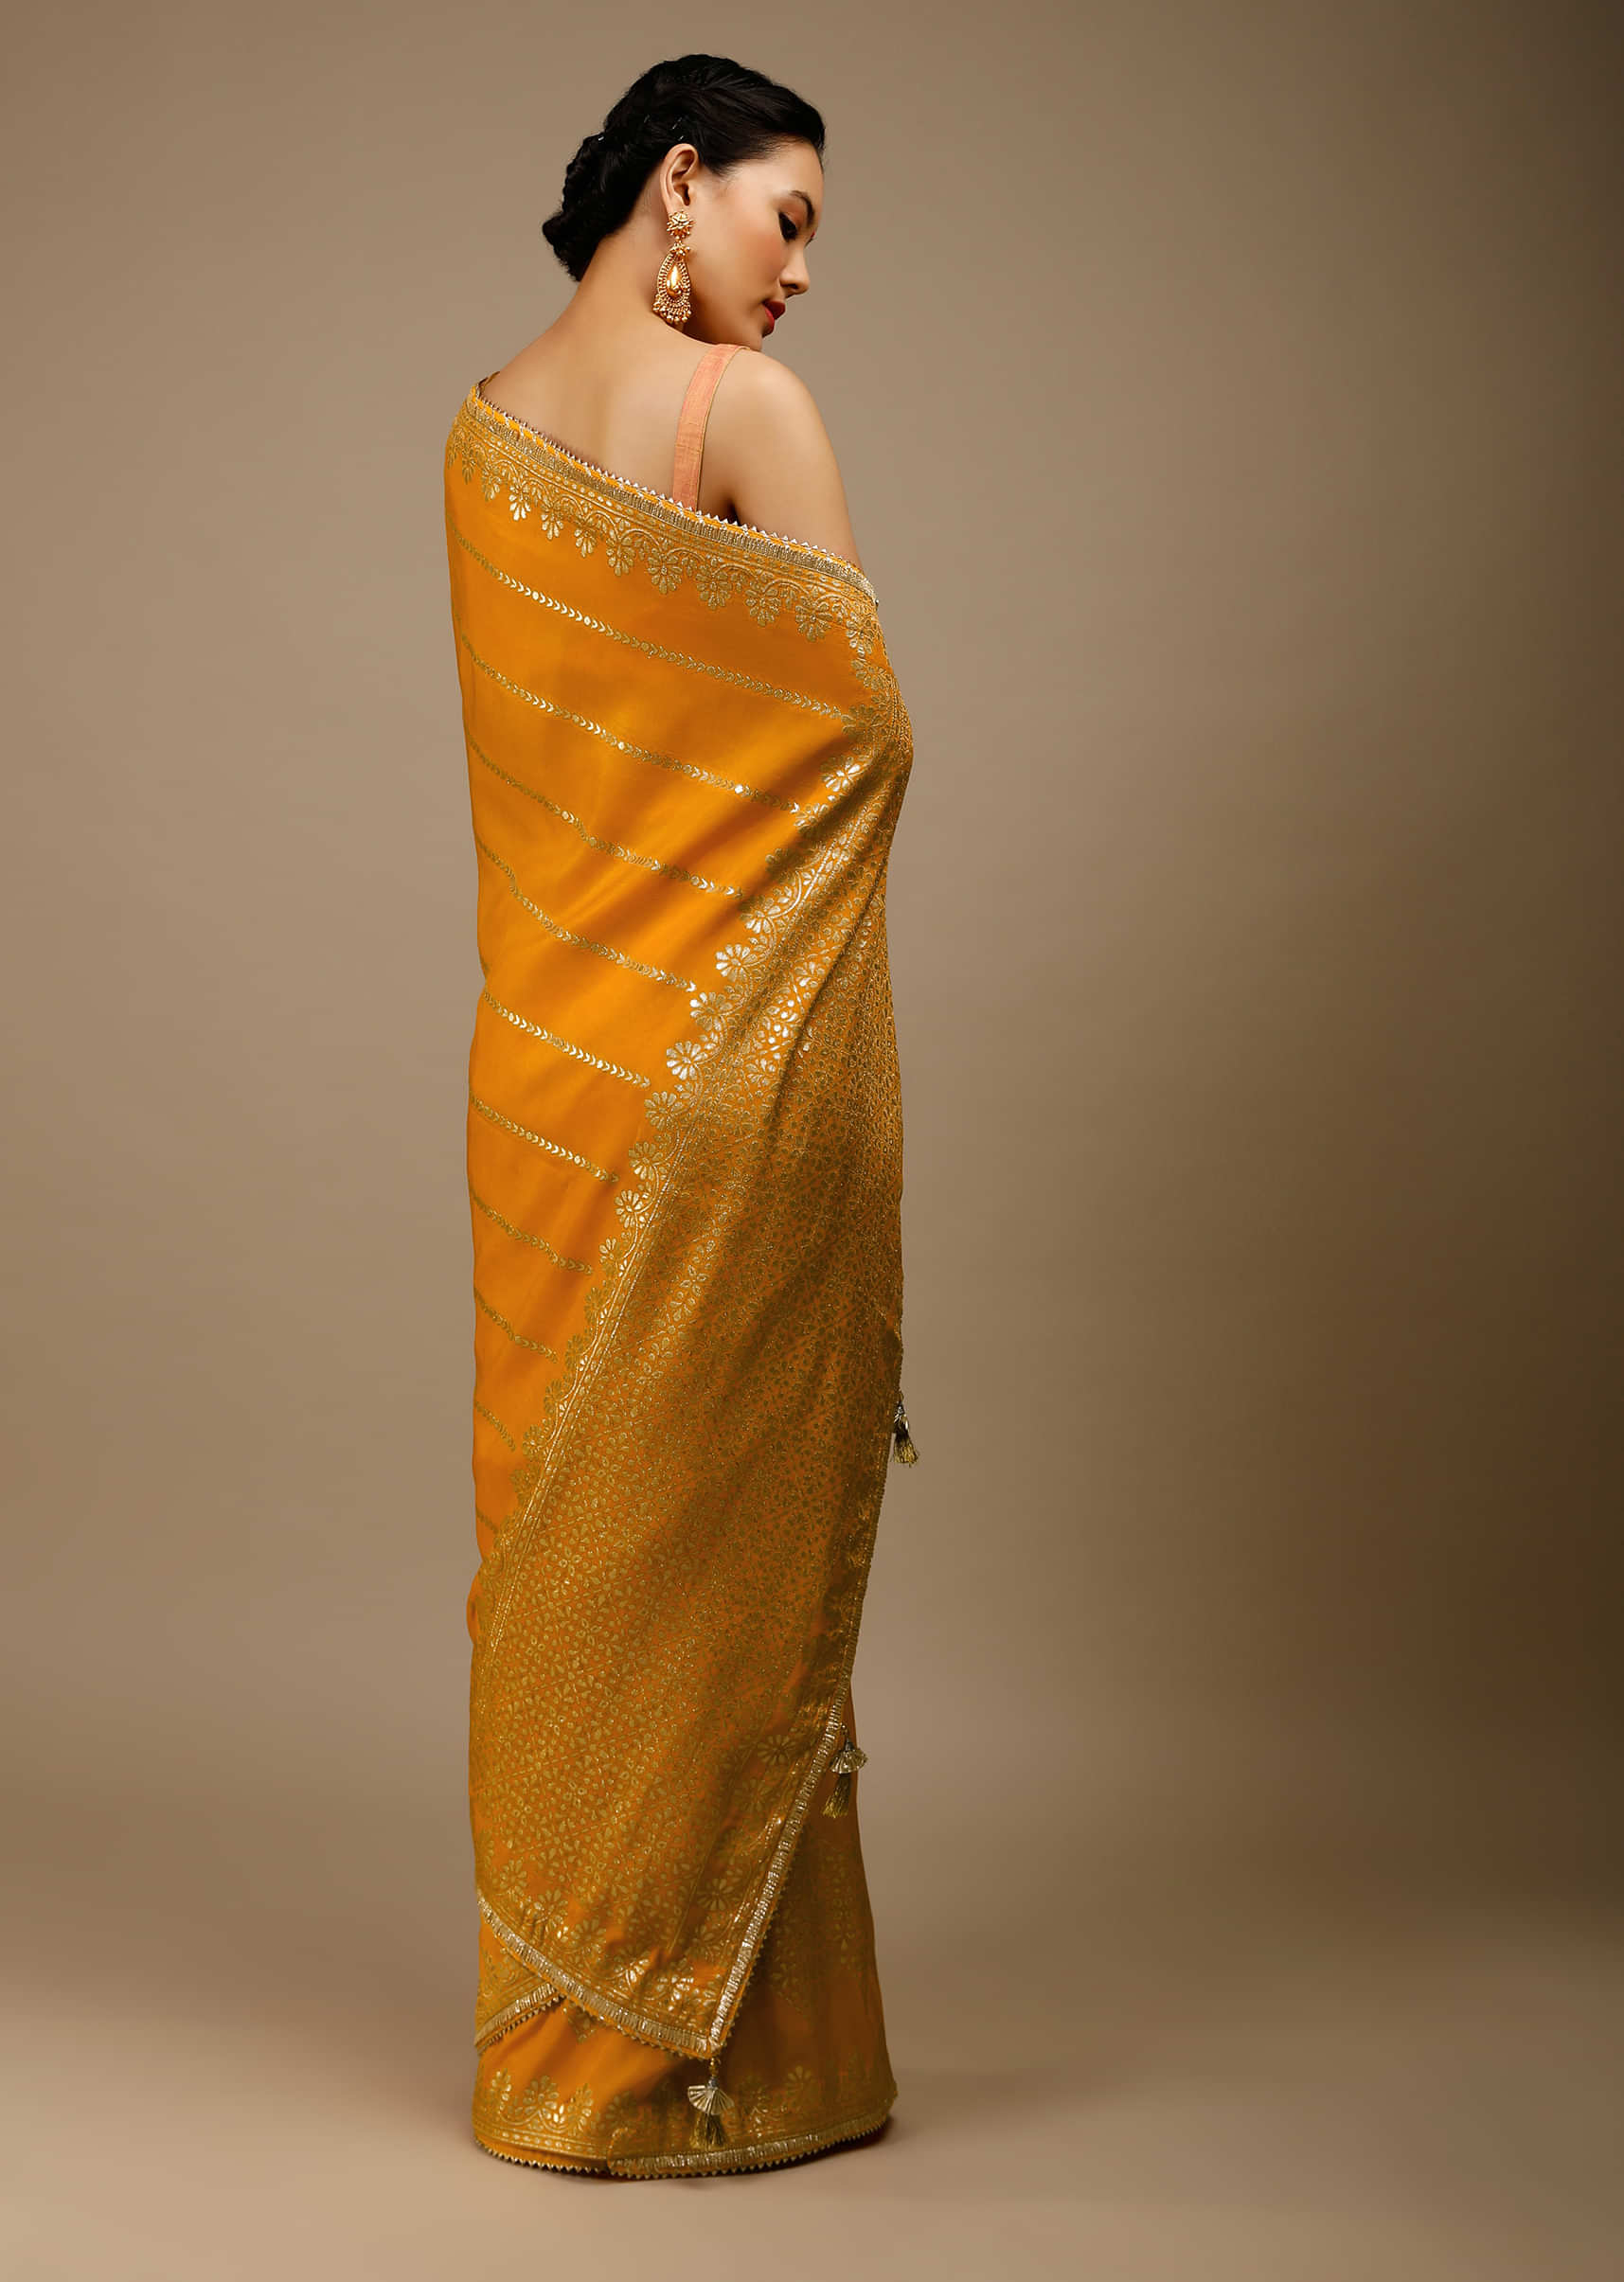 Cadmium Yellow Saree In Dola Silk With Lurex Woven Stripes On The Pallu And Geometric Floral Motifs On The Pleats  